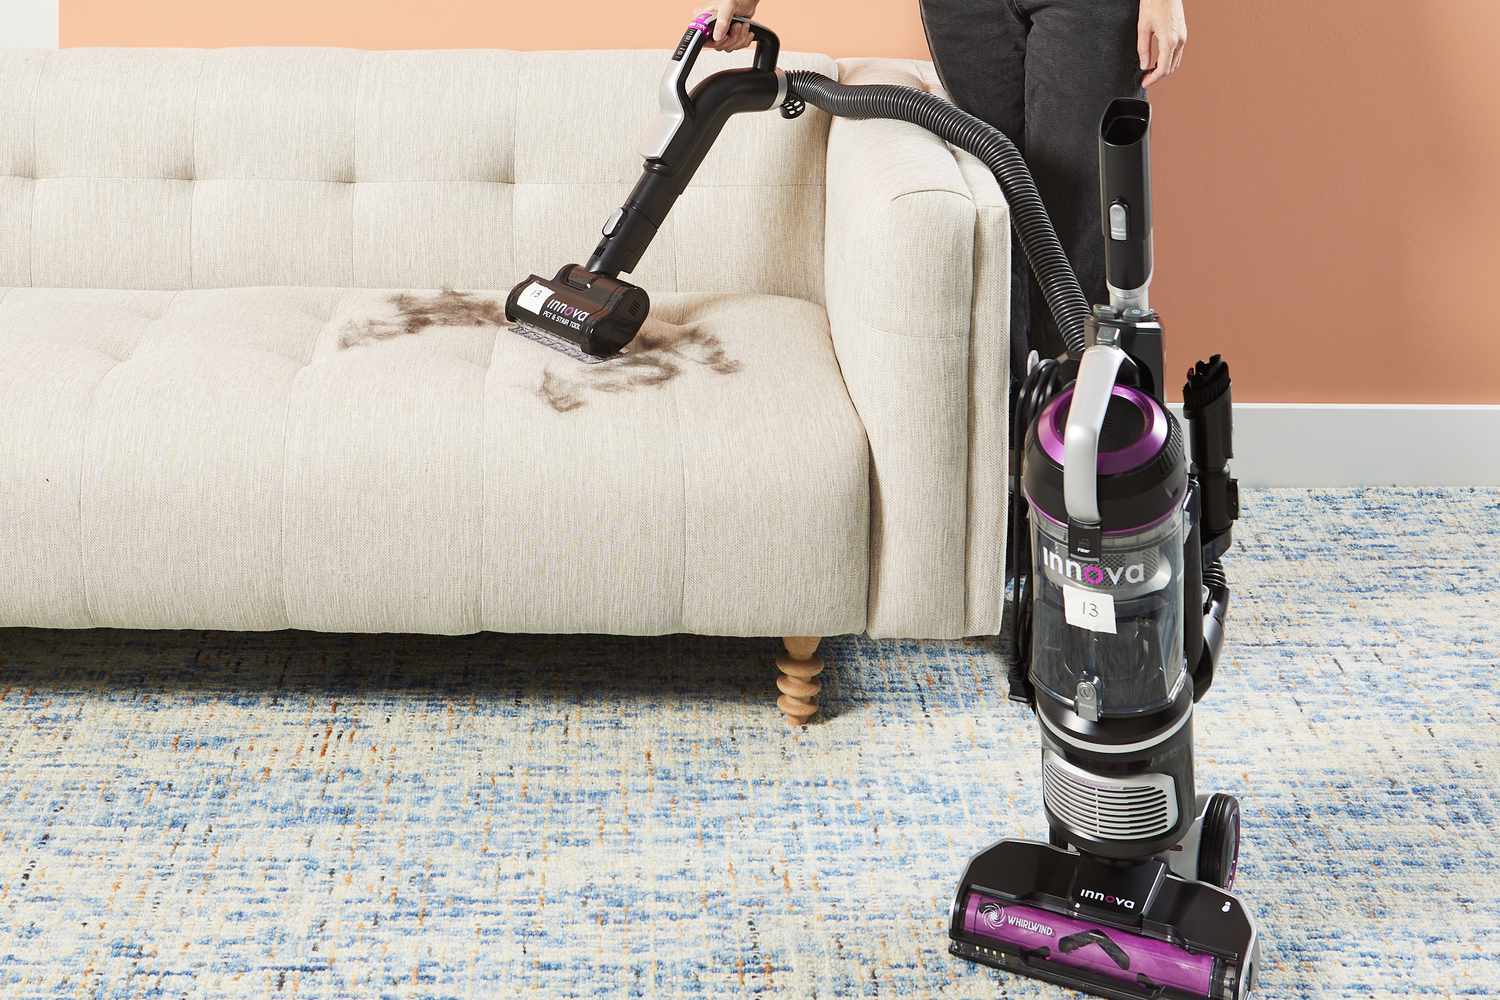 Eureka NEU700 Innova Upright Vacuum is used to clean fuzz on the couch